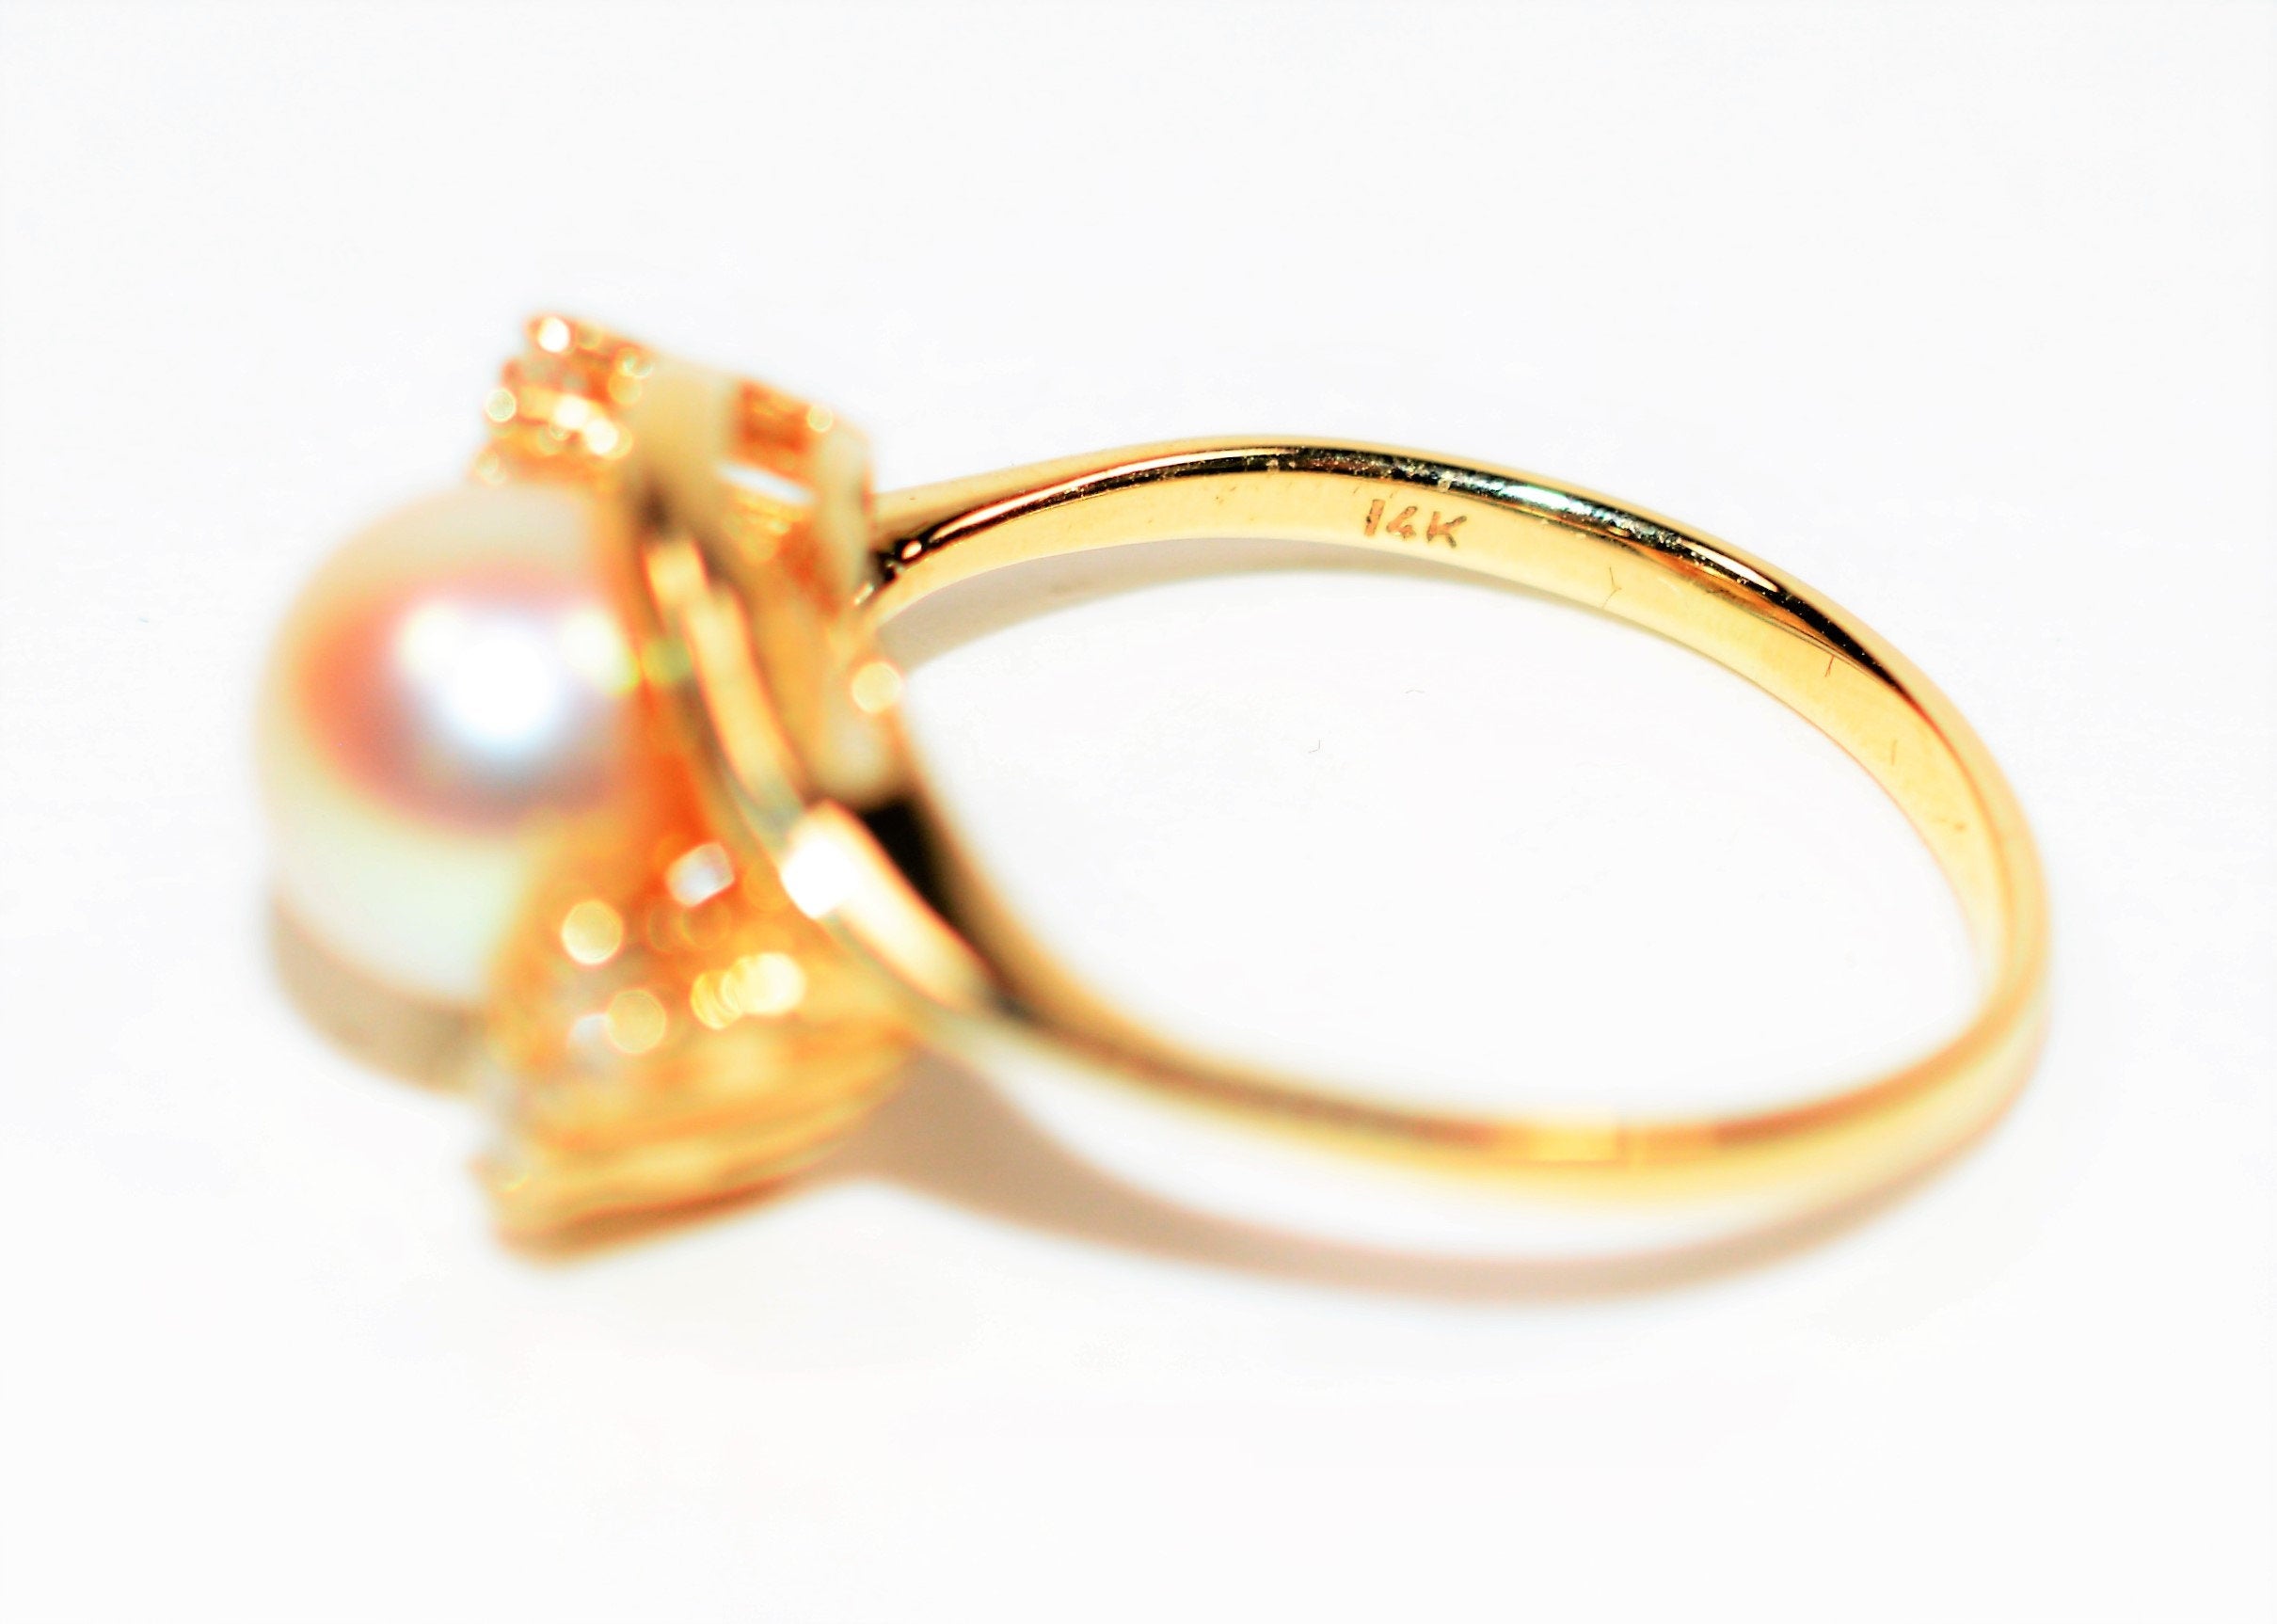 Natural Akoya Pearl & Diamond Ring 14K Solid Gold .16tcw Pearl Ring Vintage Ring June Birthstone Ring Gemstone Fine Jewelry Estate Jewellery